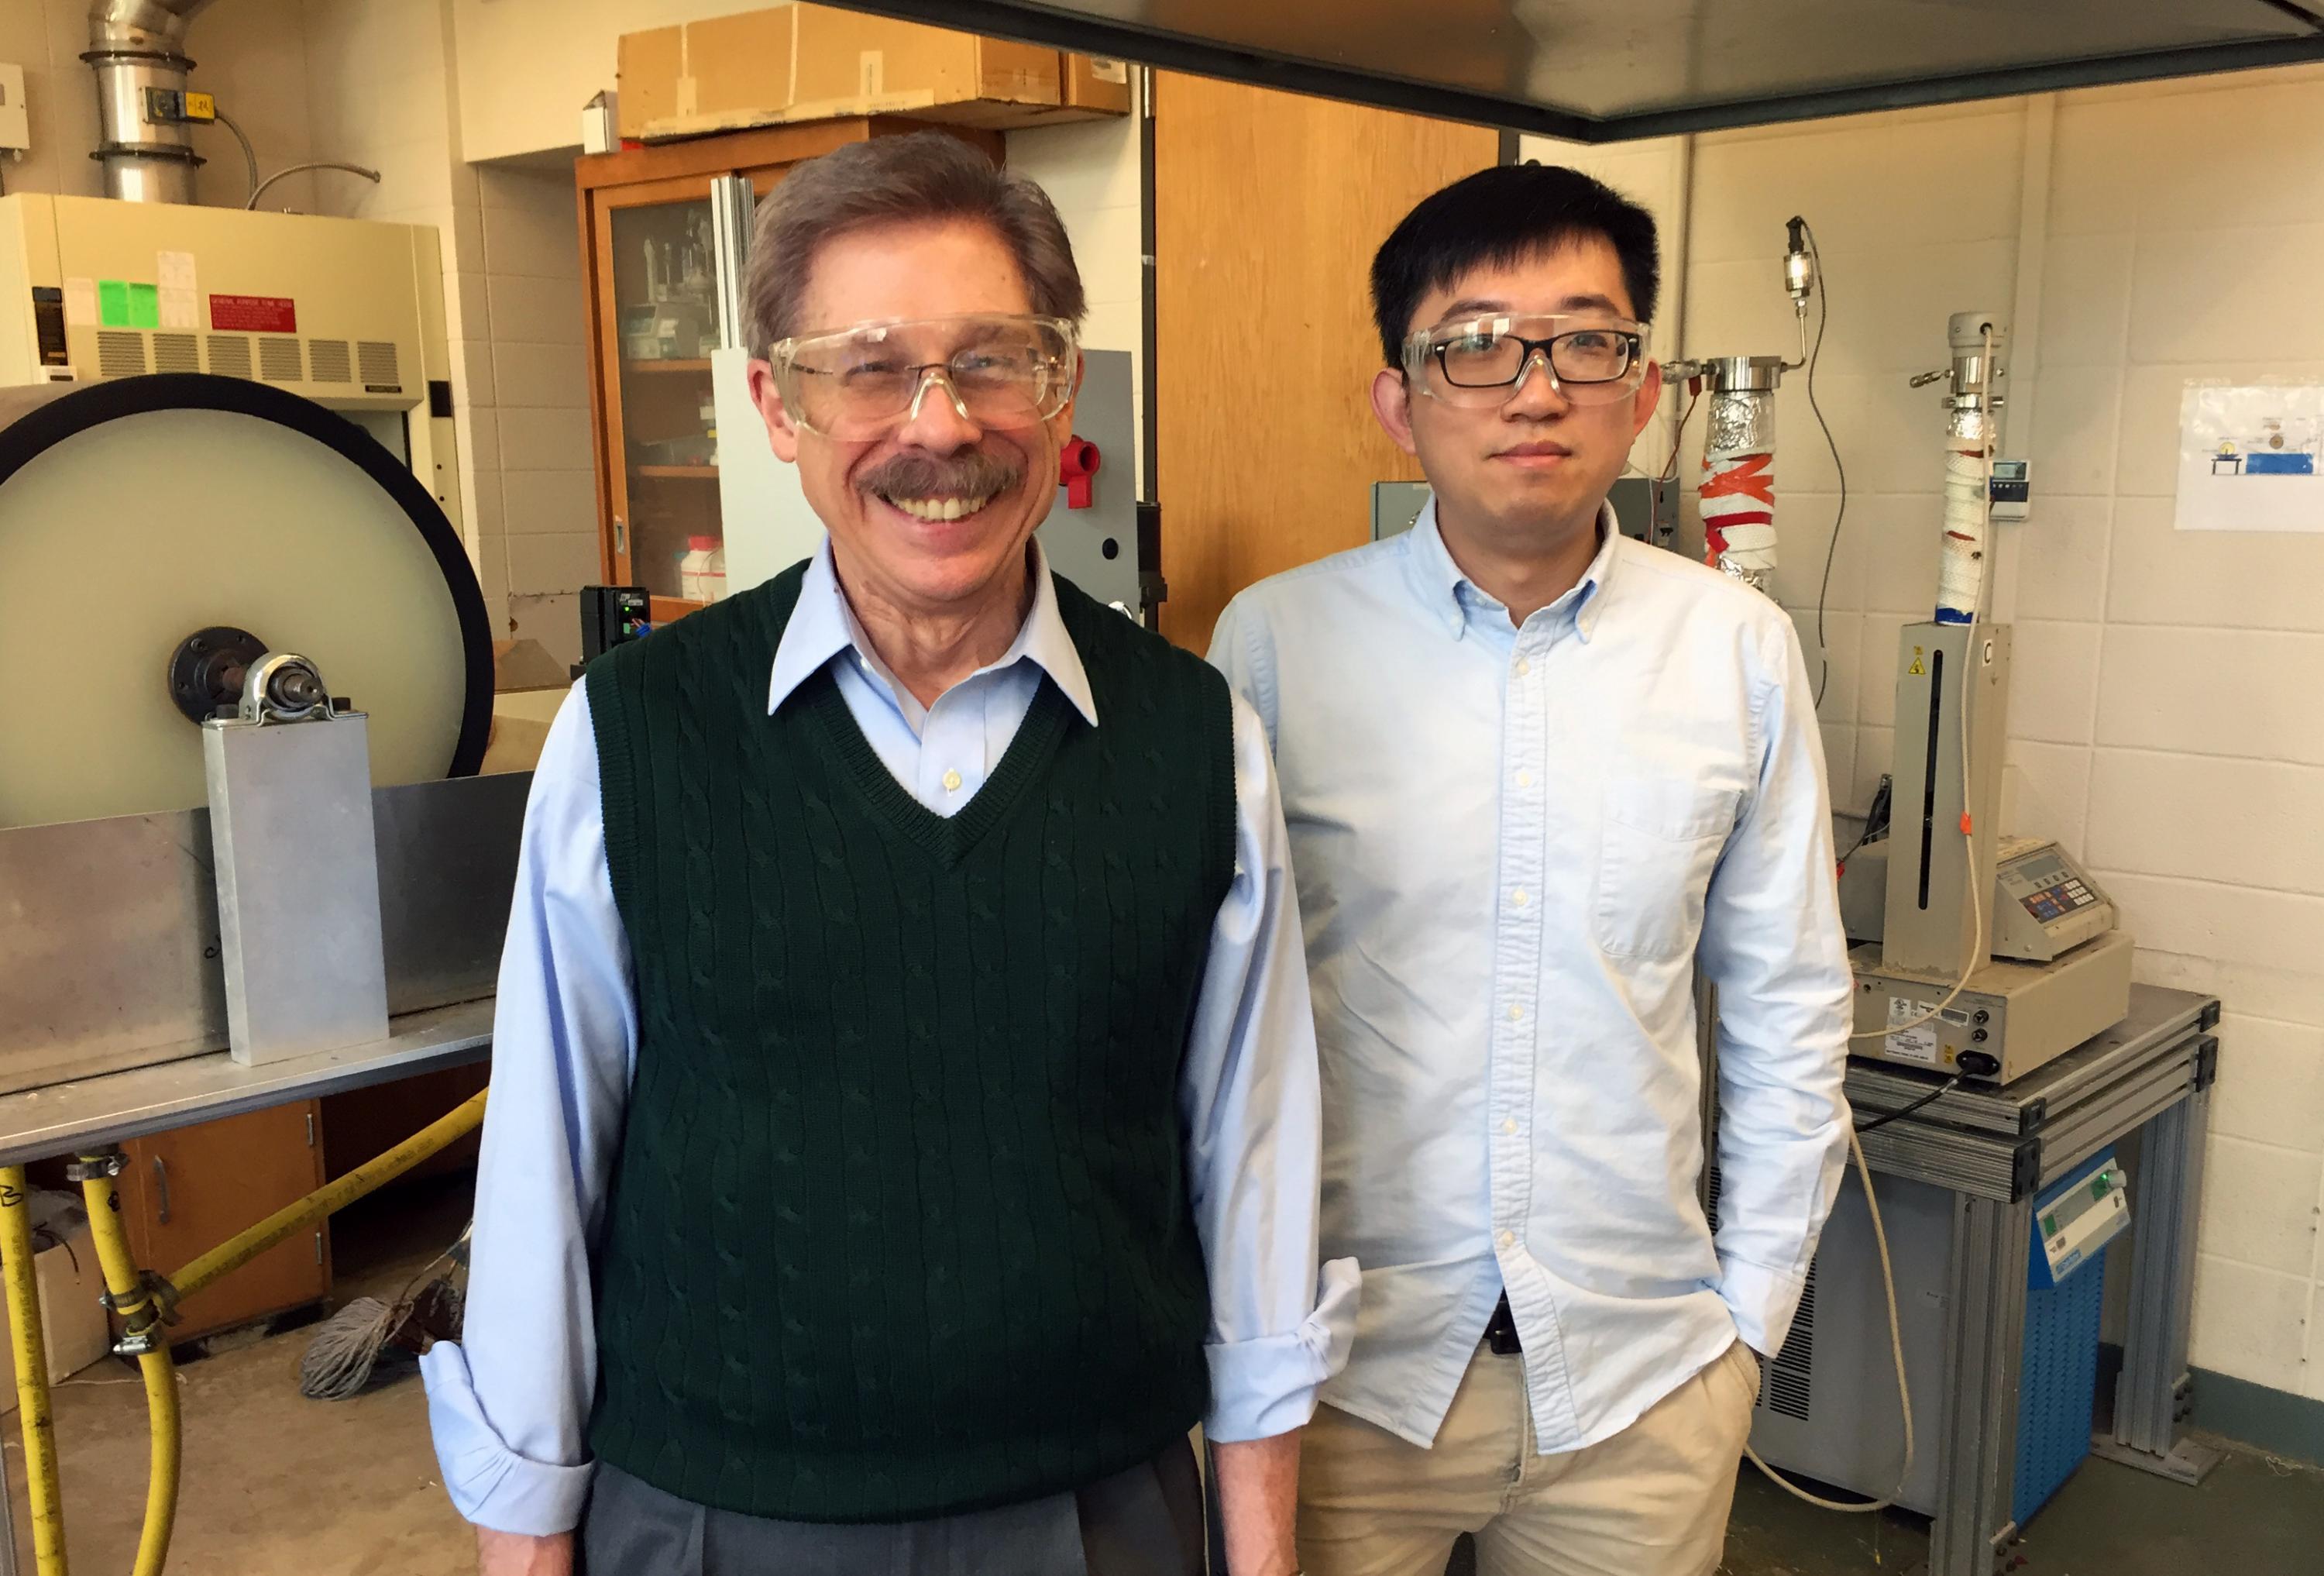 Georgia Tech professor William J. Koros and research engineer Chen Zhang are shown with a dry-wet hollow fiber spinning system. (Credit: John Toon, Georgia Tech)